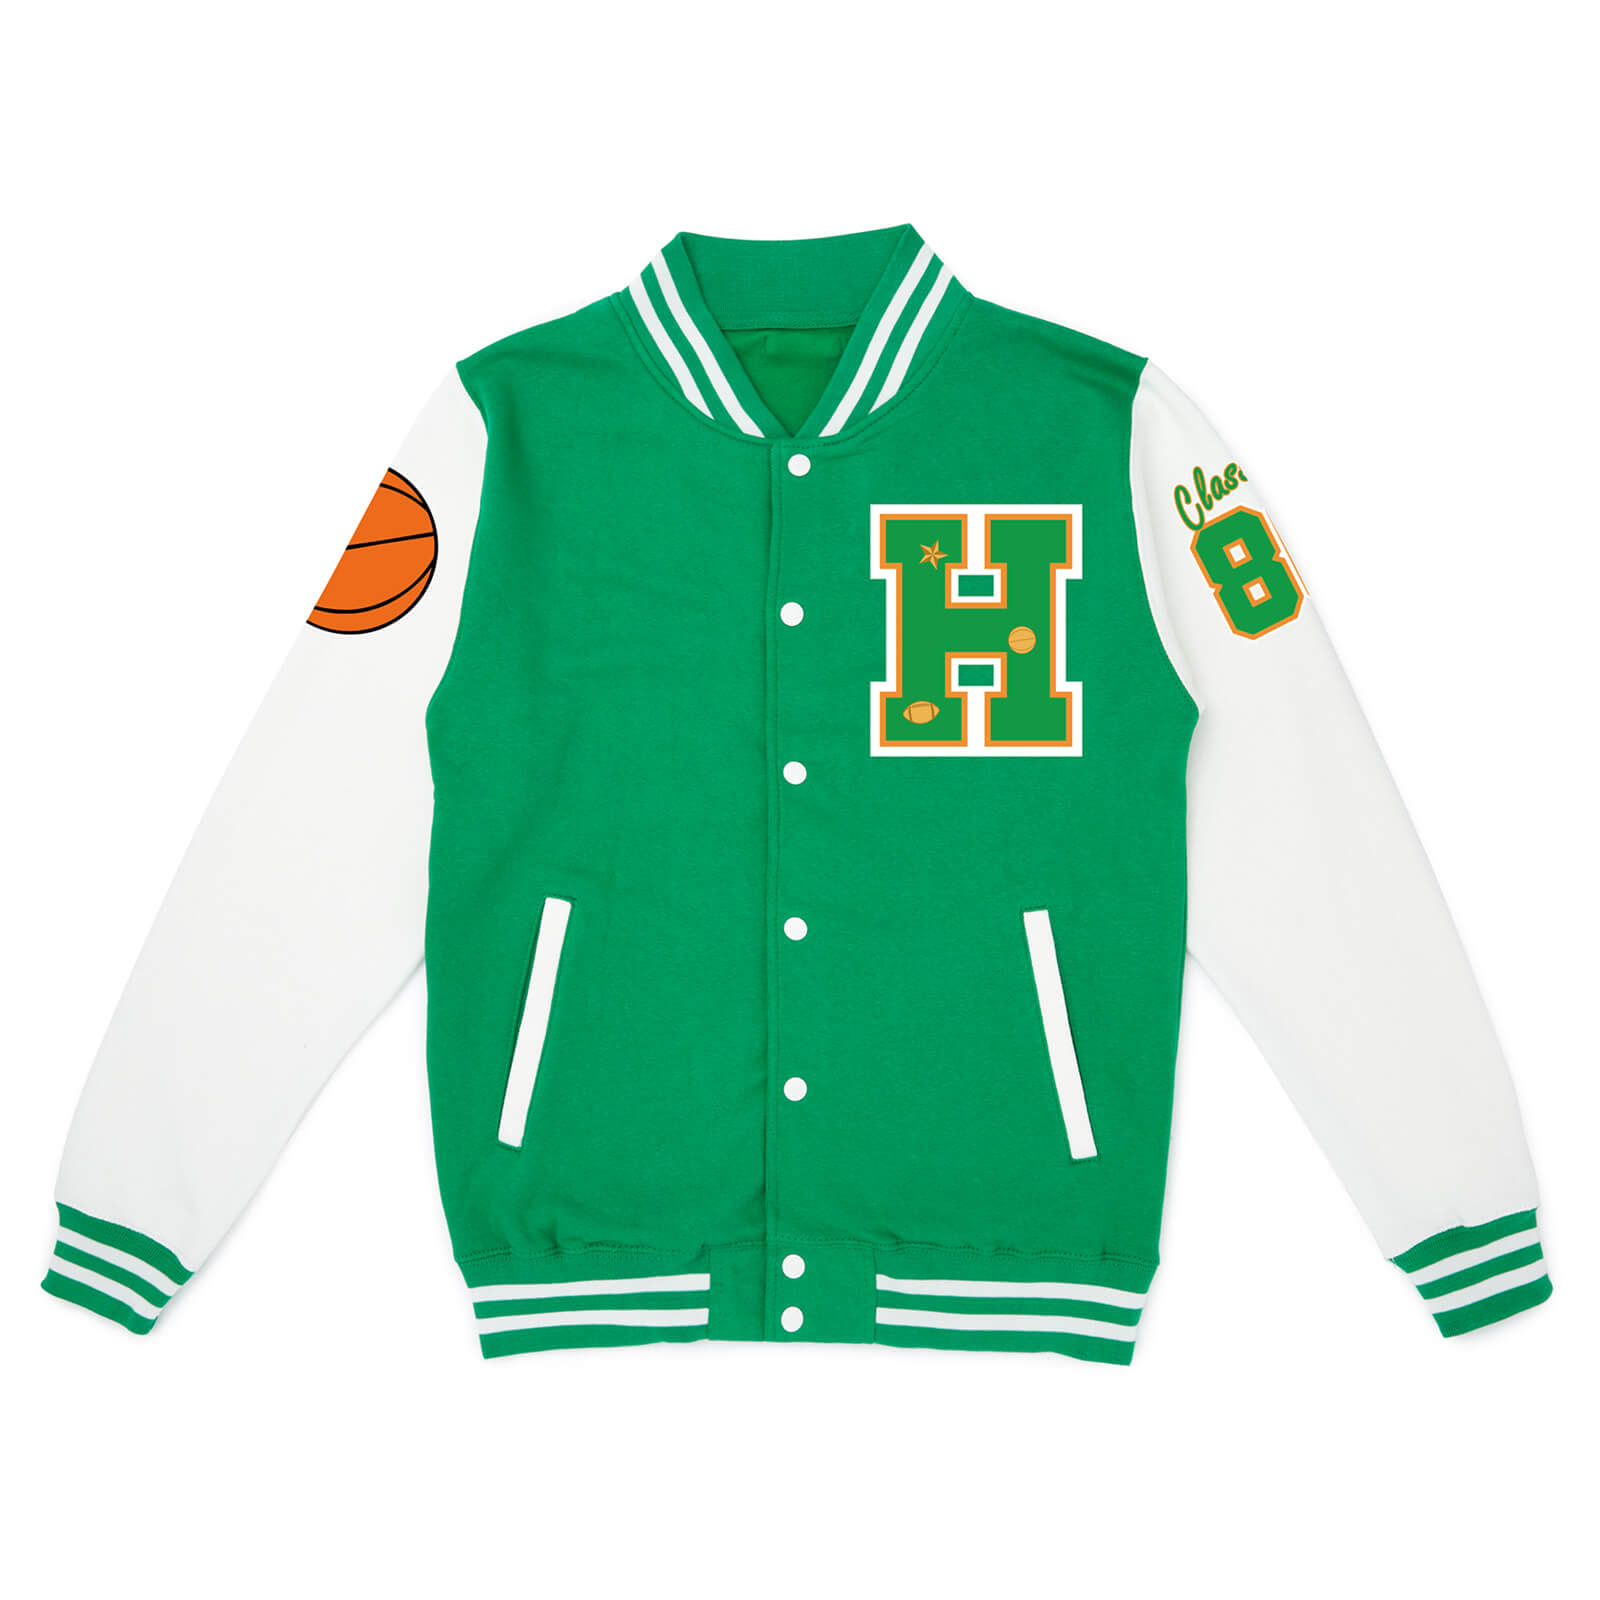 Stranger Things Hawkins High School Varsity Jacket & Patches - Green/White - L